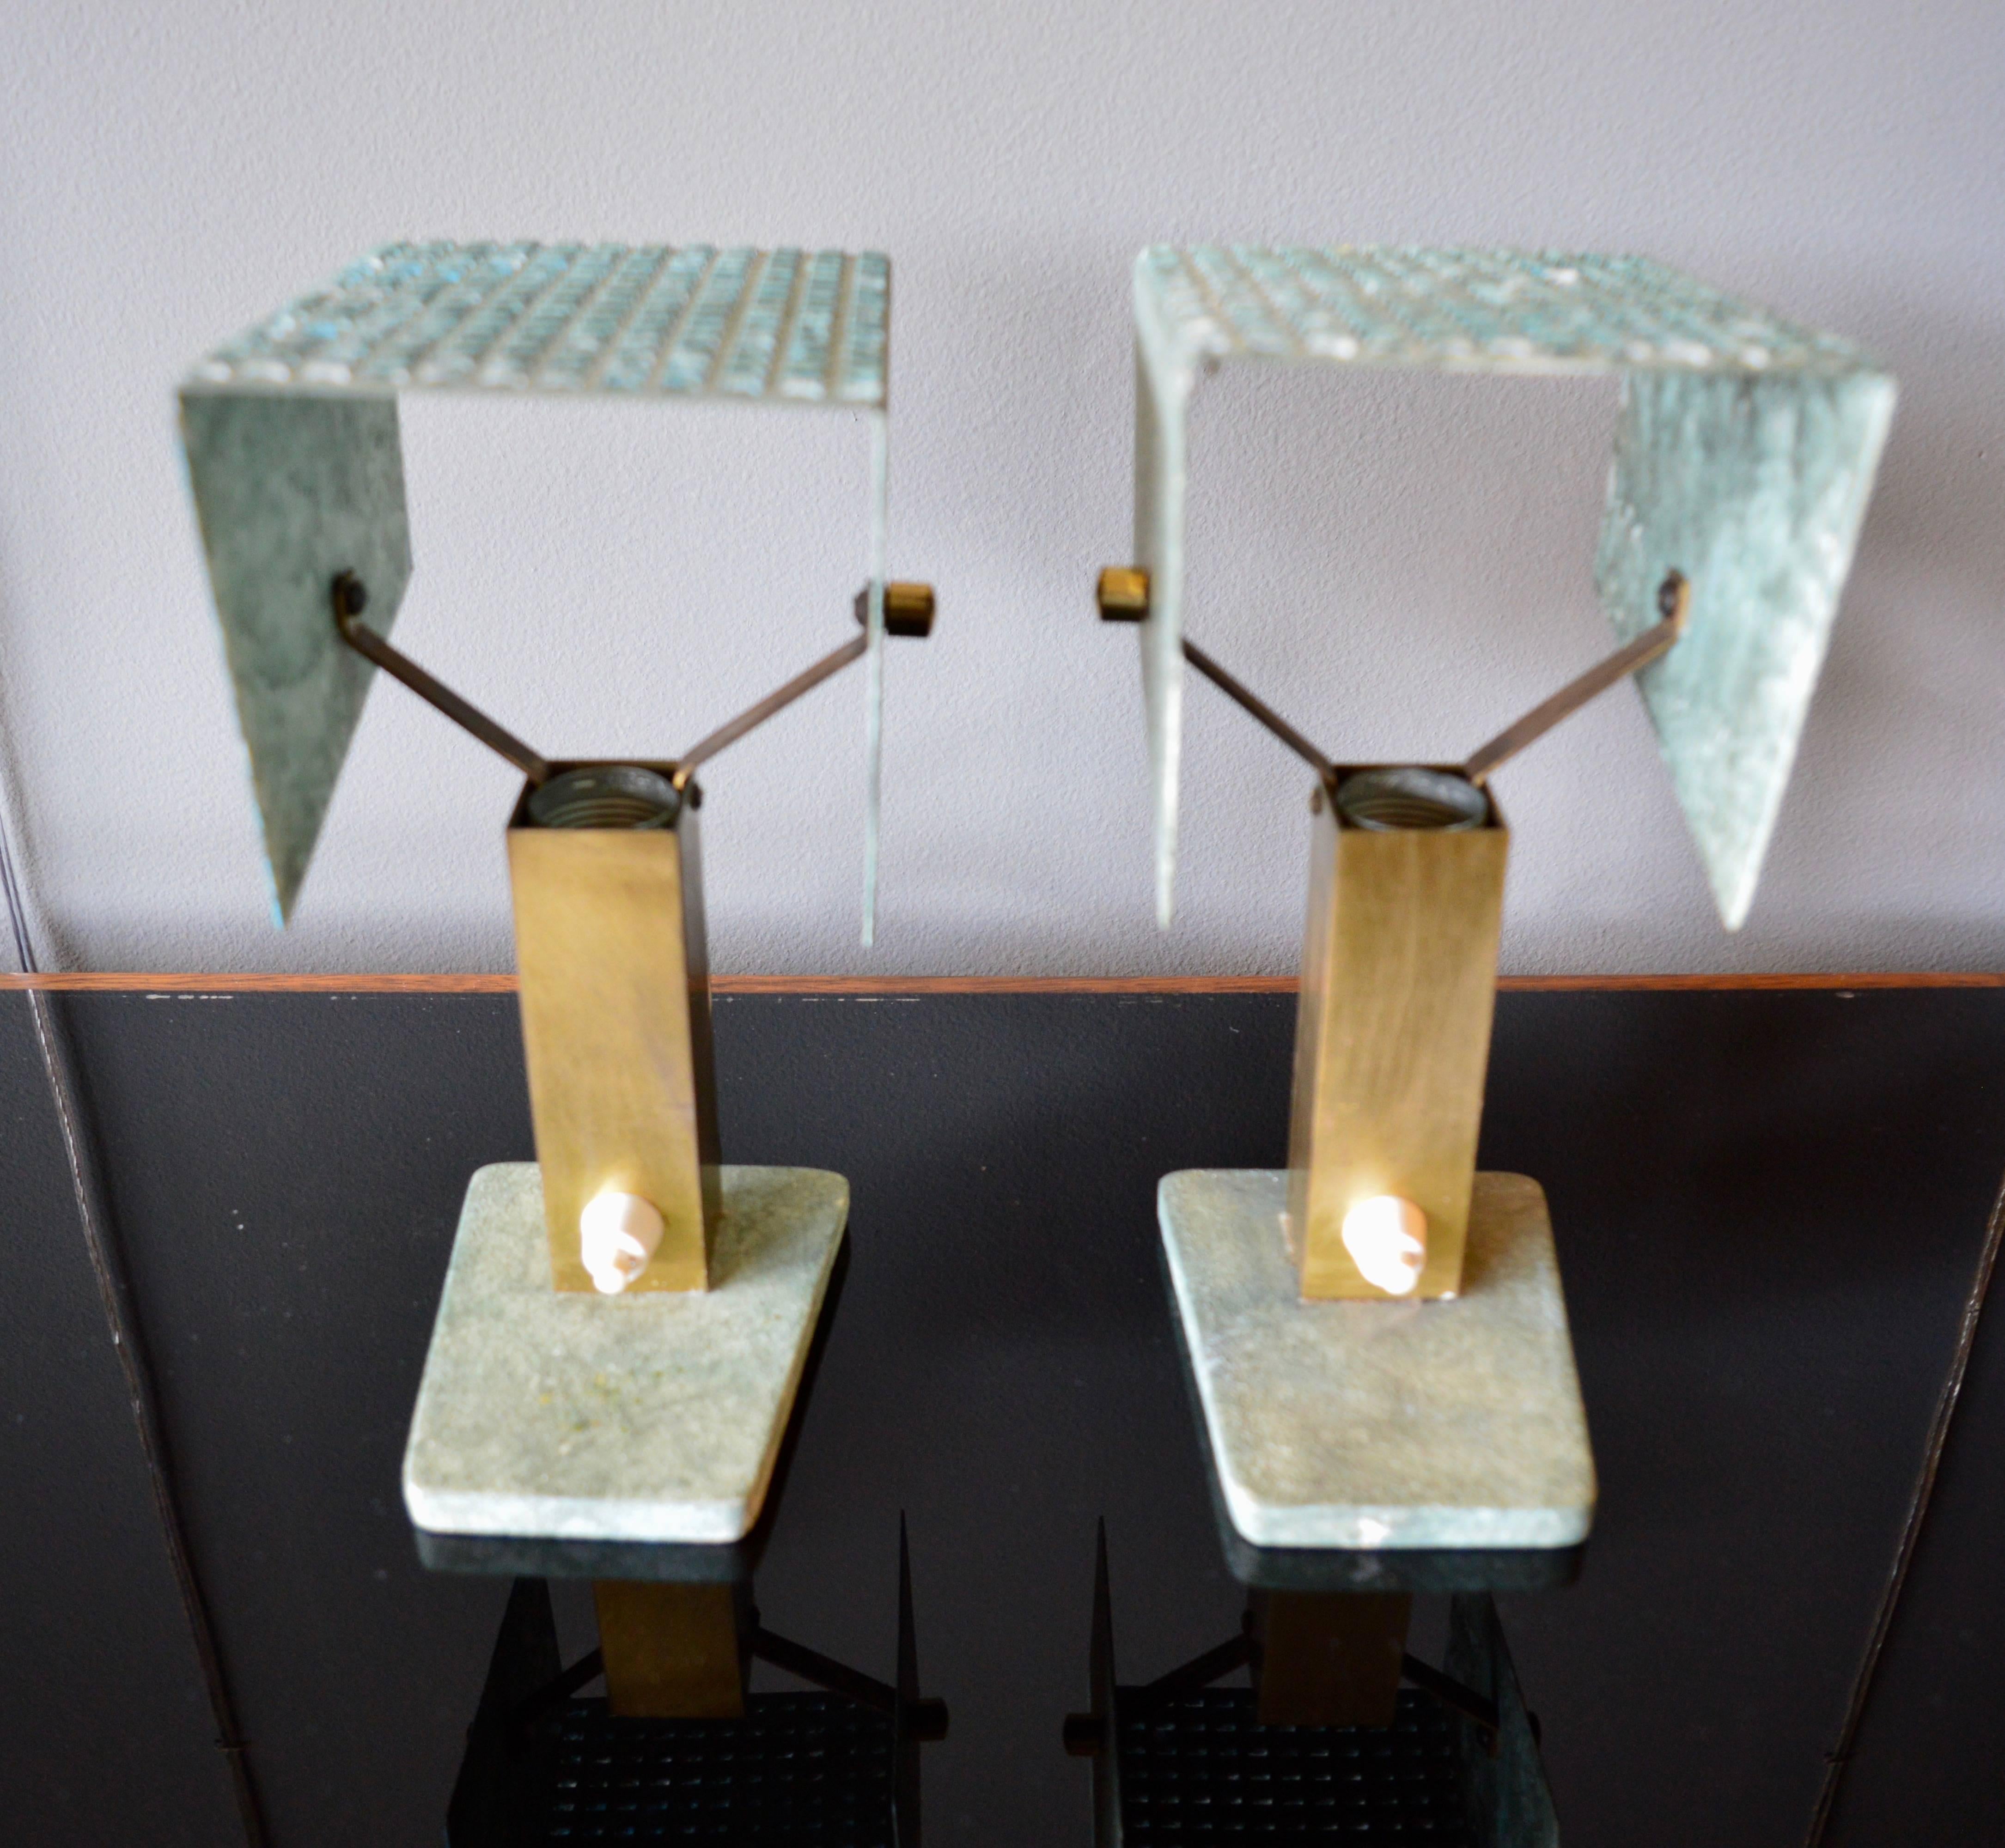 Fantastic pair of petite Italian table lamps. Stone base with brass neck and pivoting copper diffuser on top. Light can be focused in different directions. Great pair of sculptural lamps. Newly rewired. Excellent vintage condition.